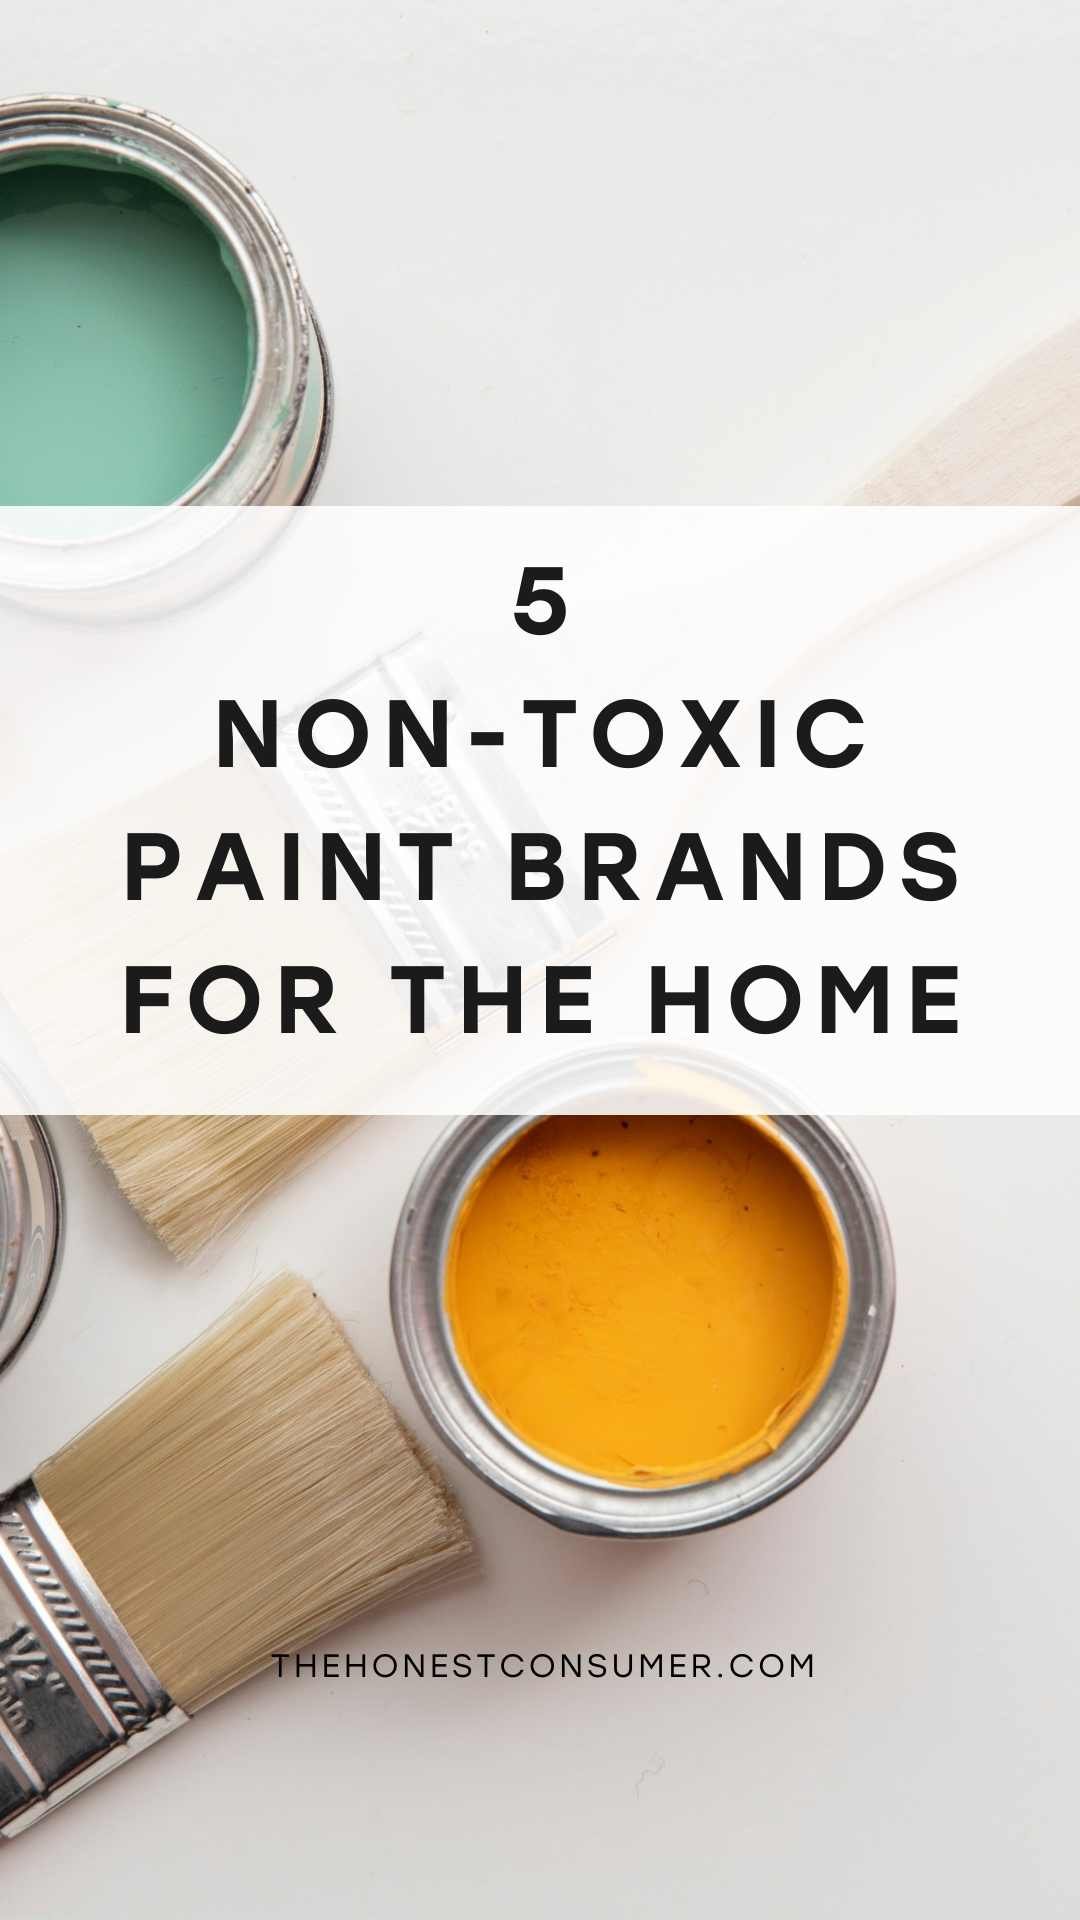 How To Choose Non-Toxic Paint and Wallpaper